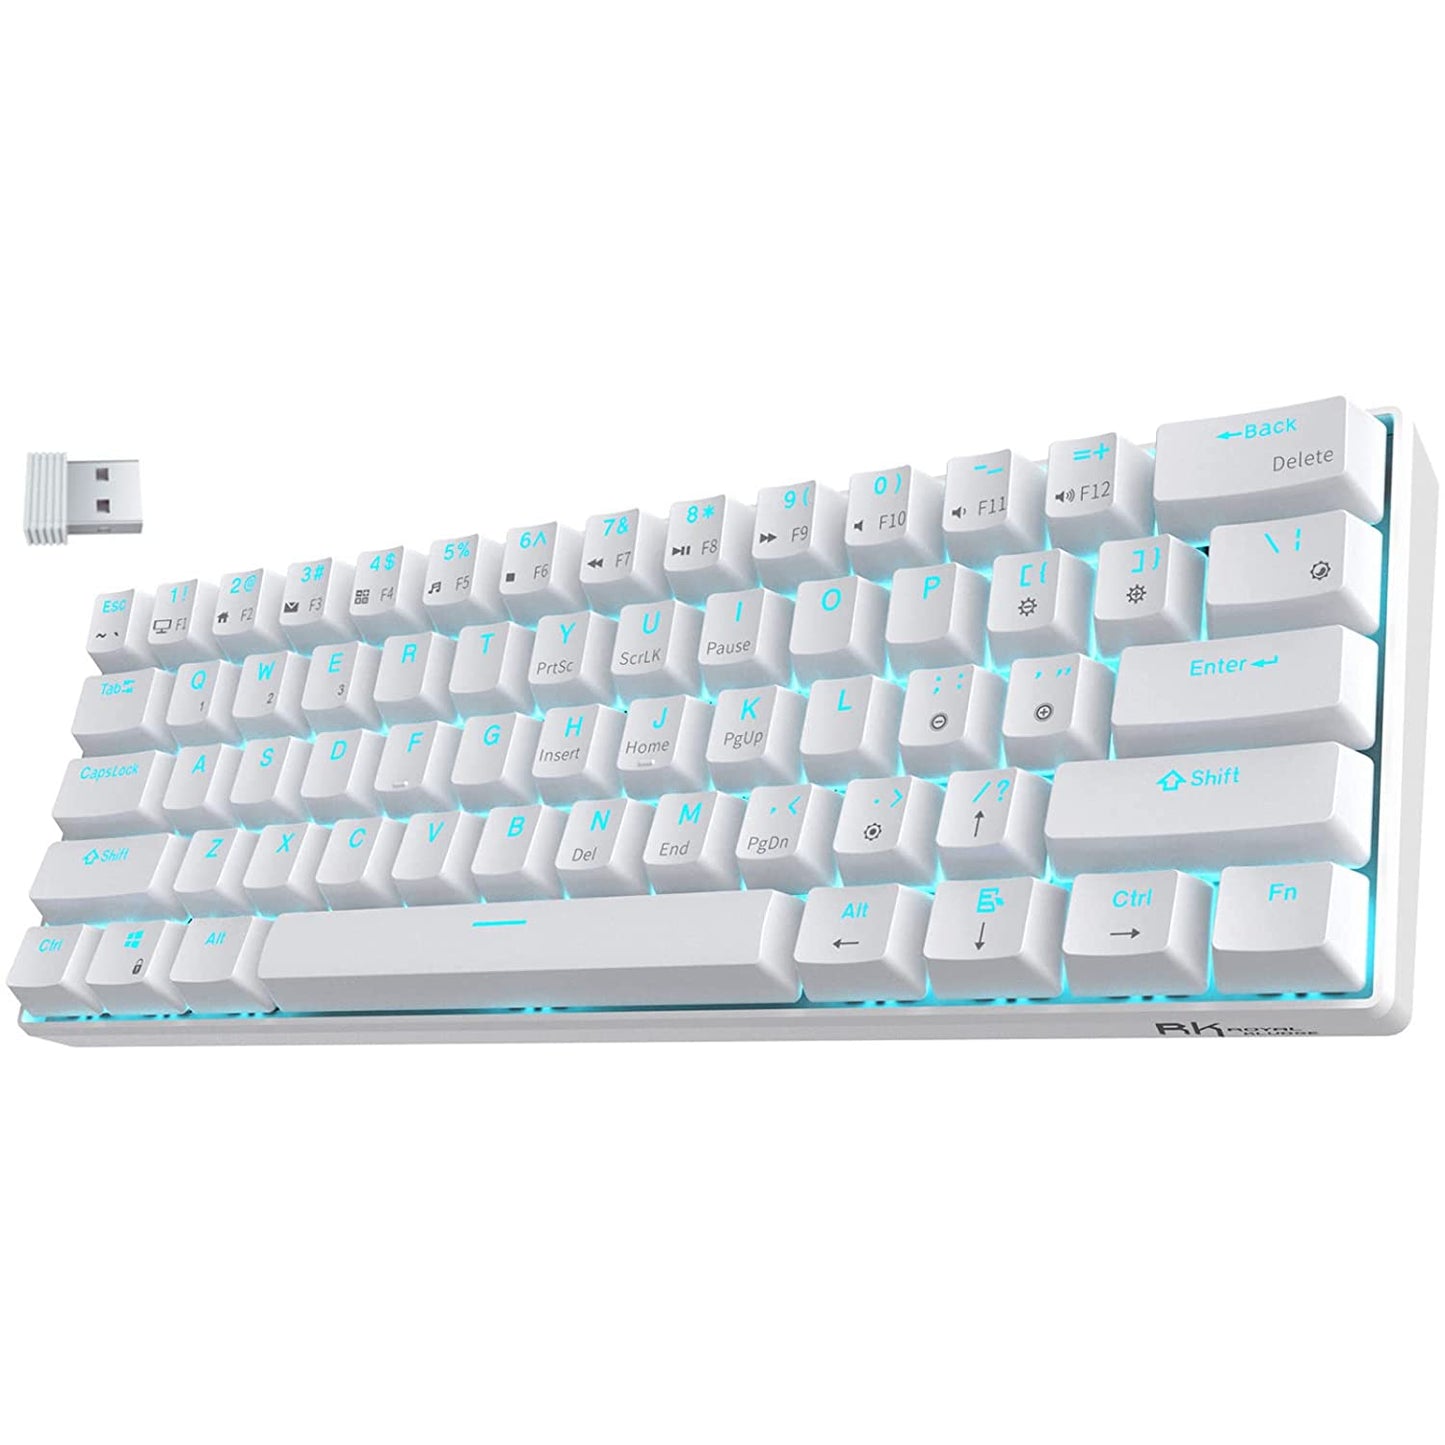 RK ROYAL KLUDGE Royal Kludge RK61 61 Keys Wired/ Wireless Multi-Device Yellow LED Backlit Mechanical Gaming Keyboard